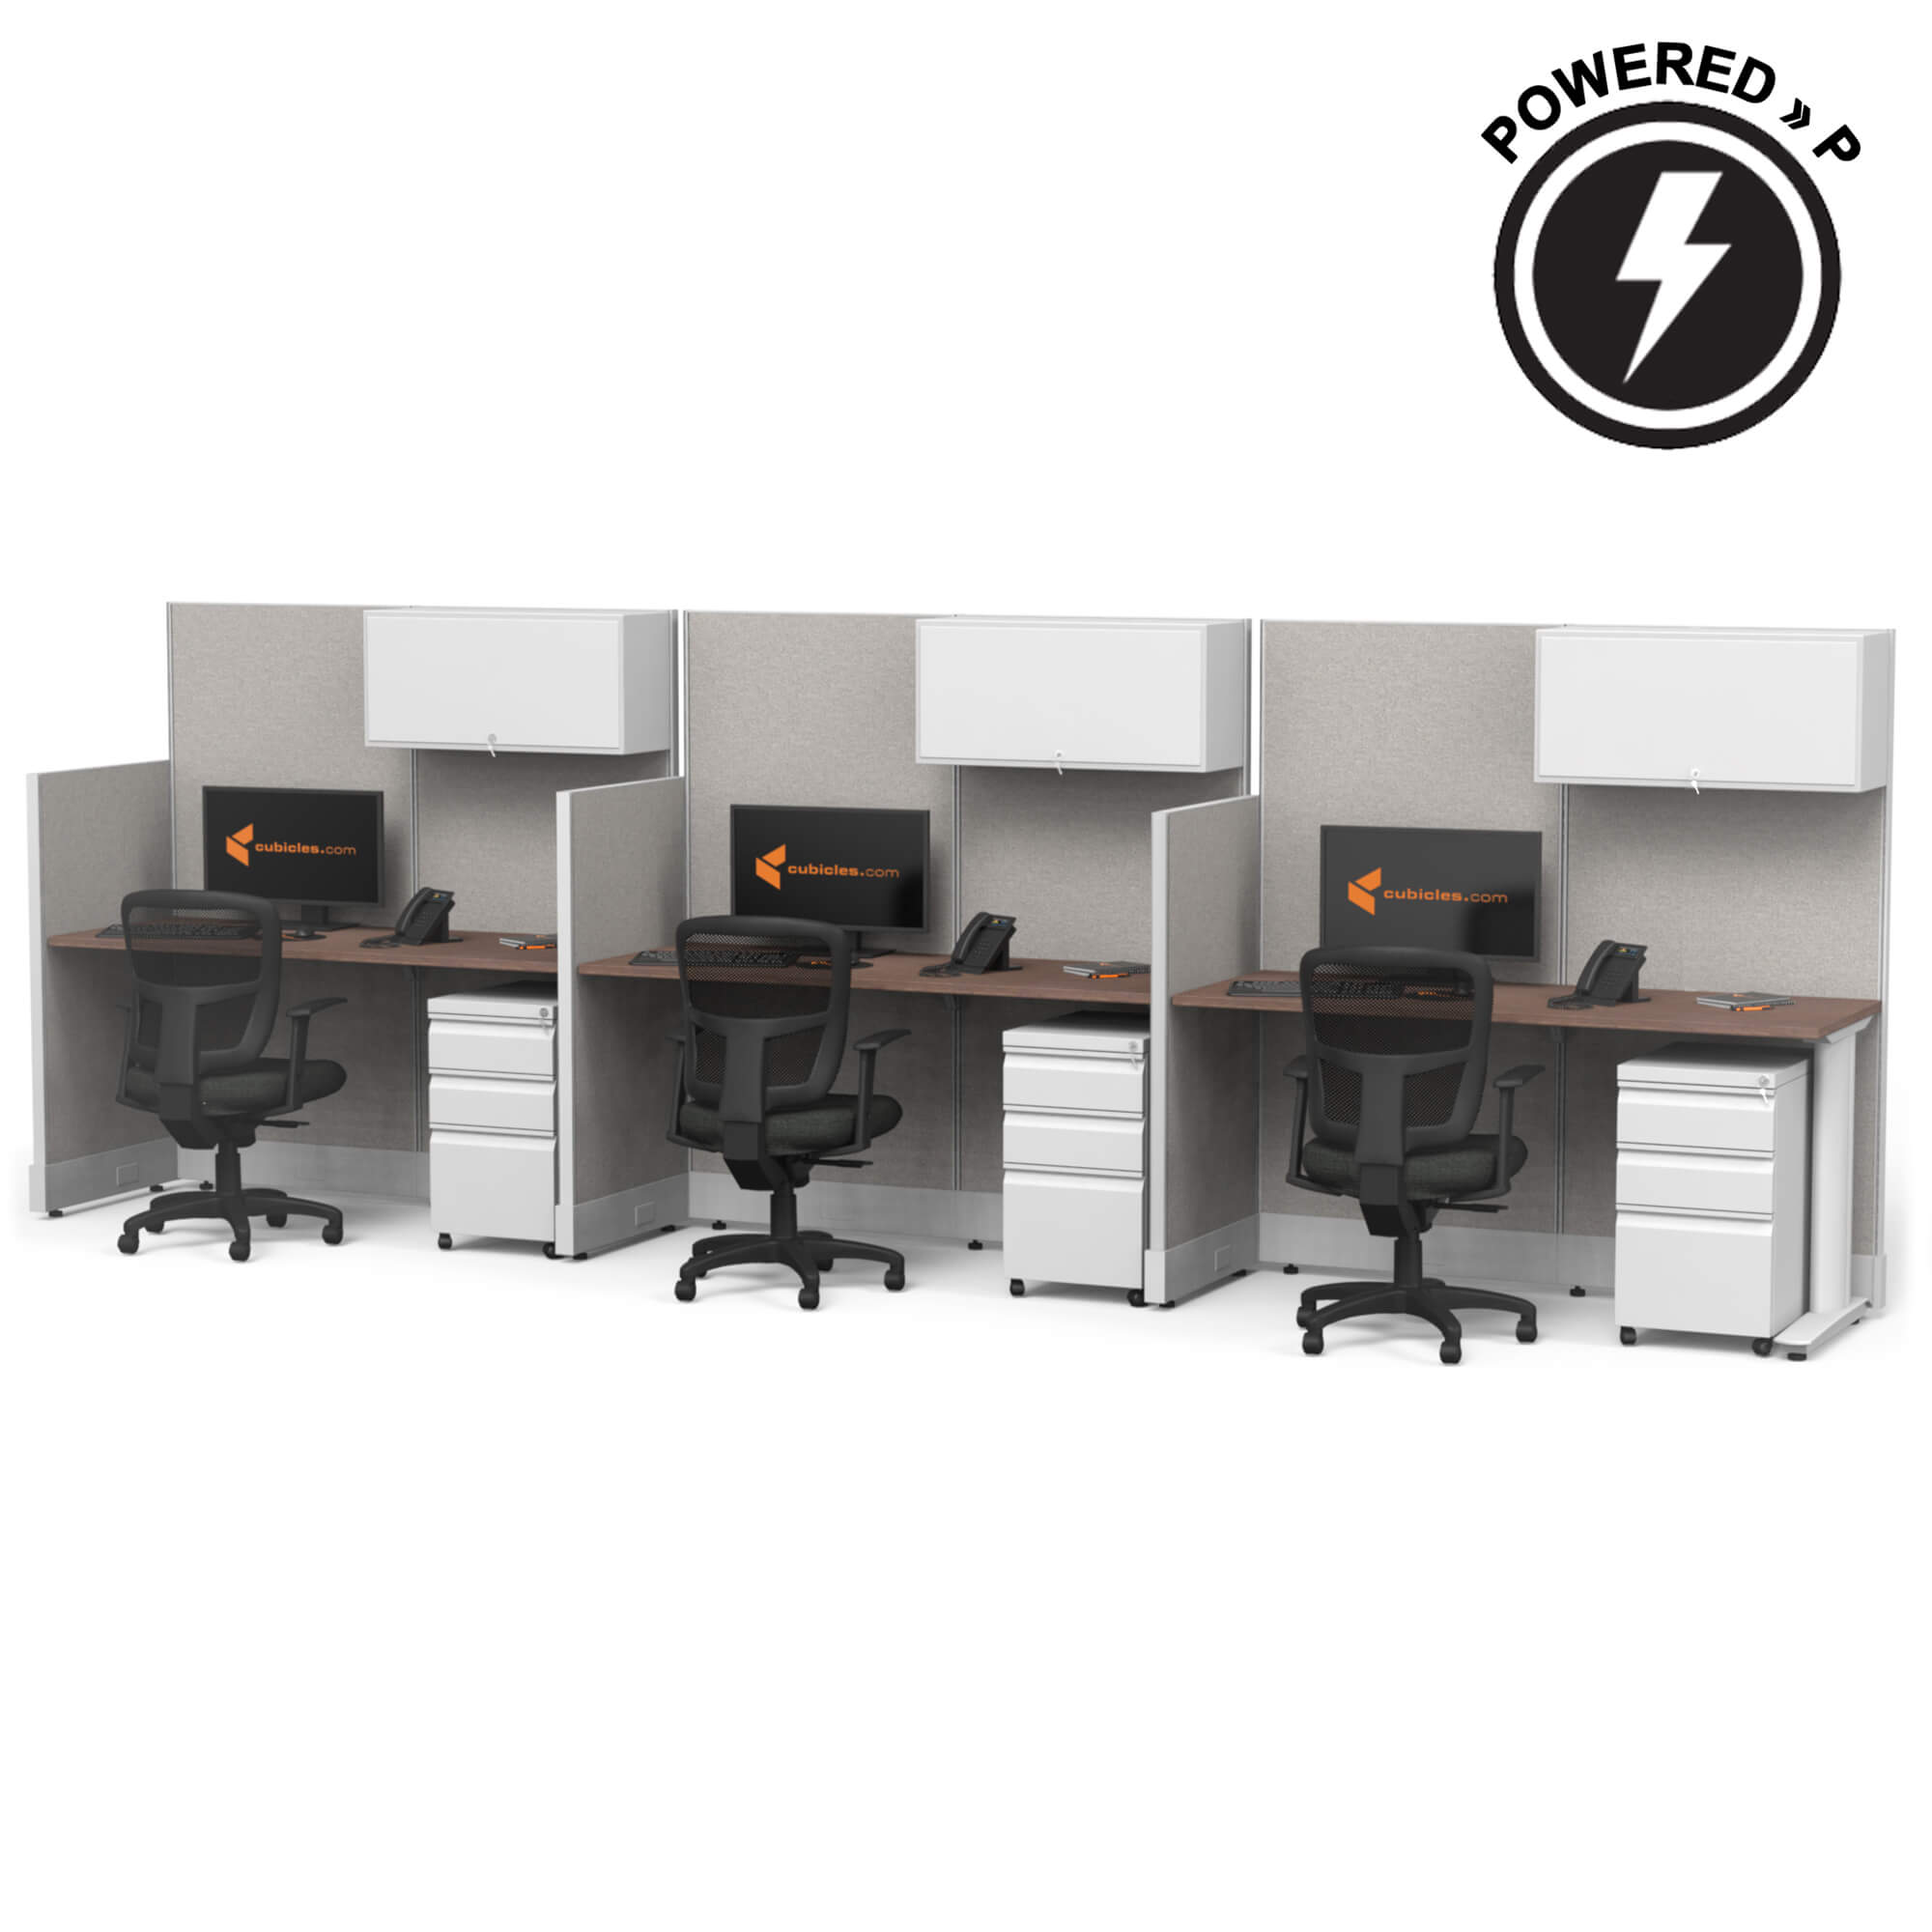 cubicle-desks-straight-workstation-3pack-inline-powered-with-storage-sign.jpg